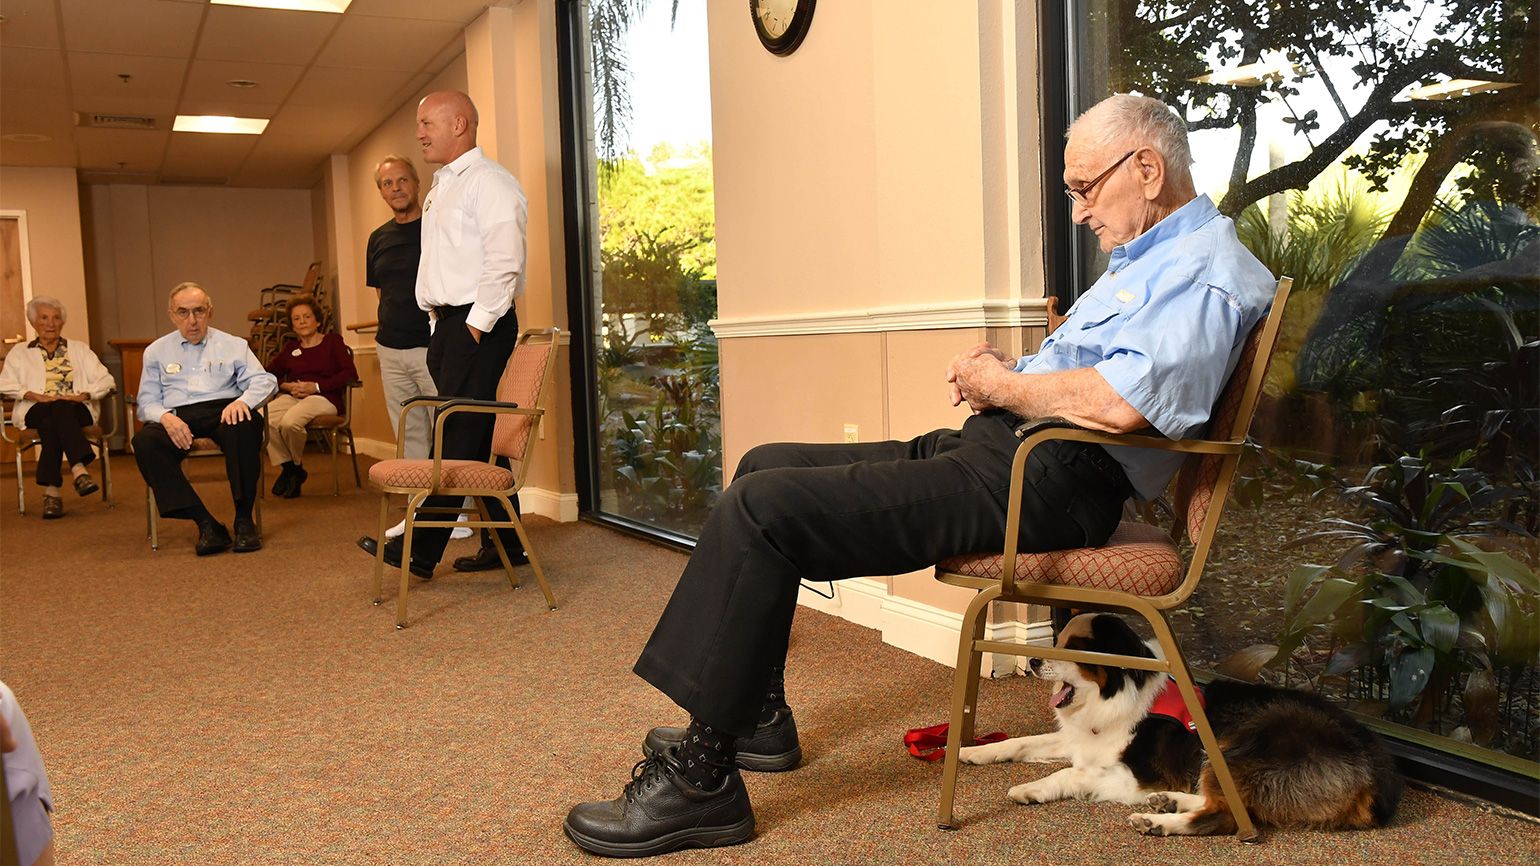 Jack and his handler, Roger Weiland, take a breather during a visit with a group of seniors participating in a Tai Chi class.